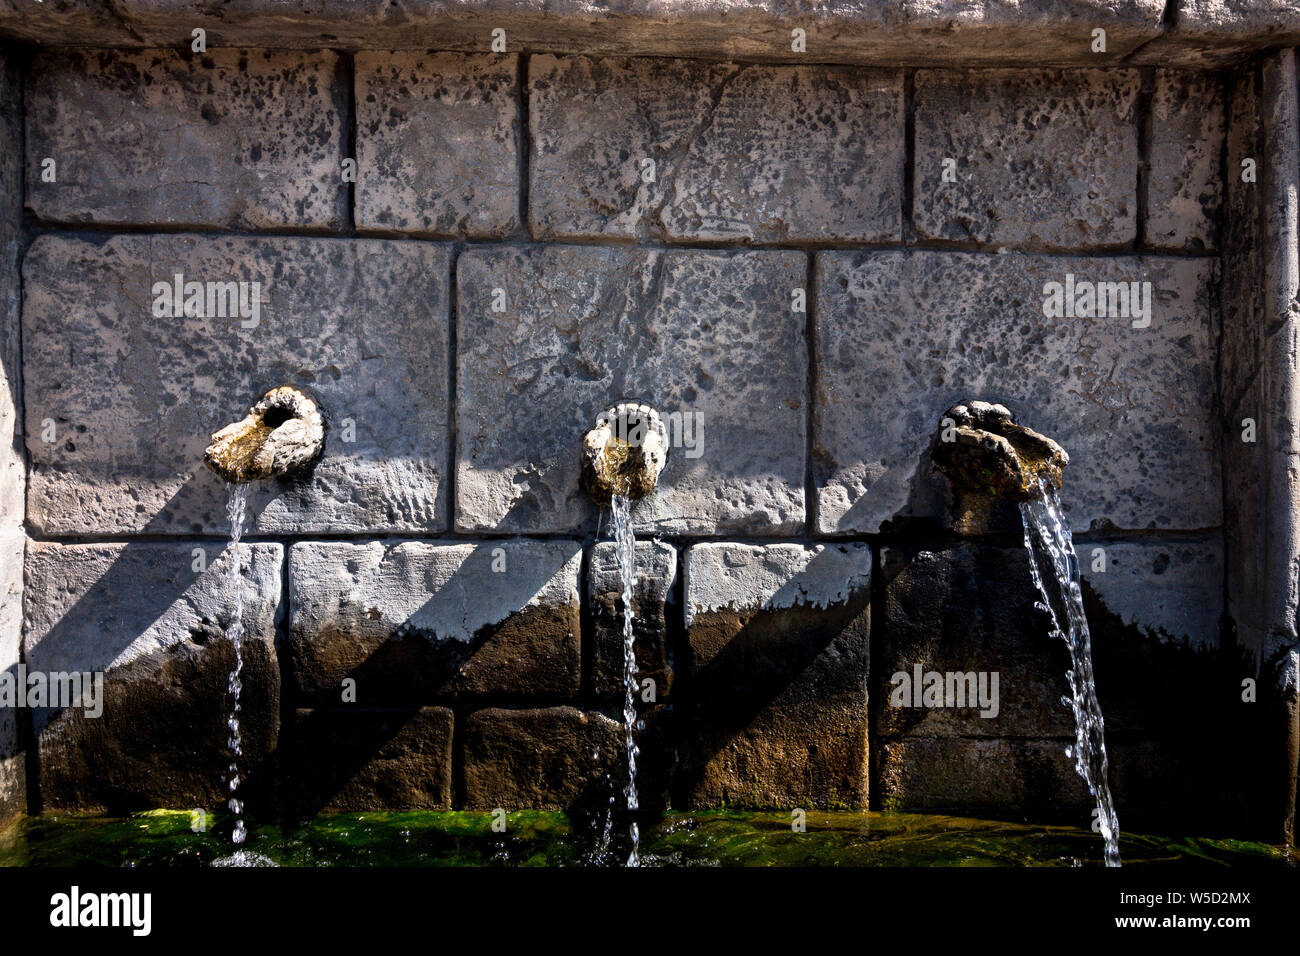 Three stone taps from which water flows. The water is clean and clear to drink. Cranes are made in the wall of an old building. Stock Photo